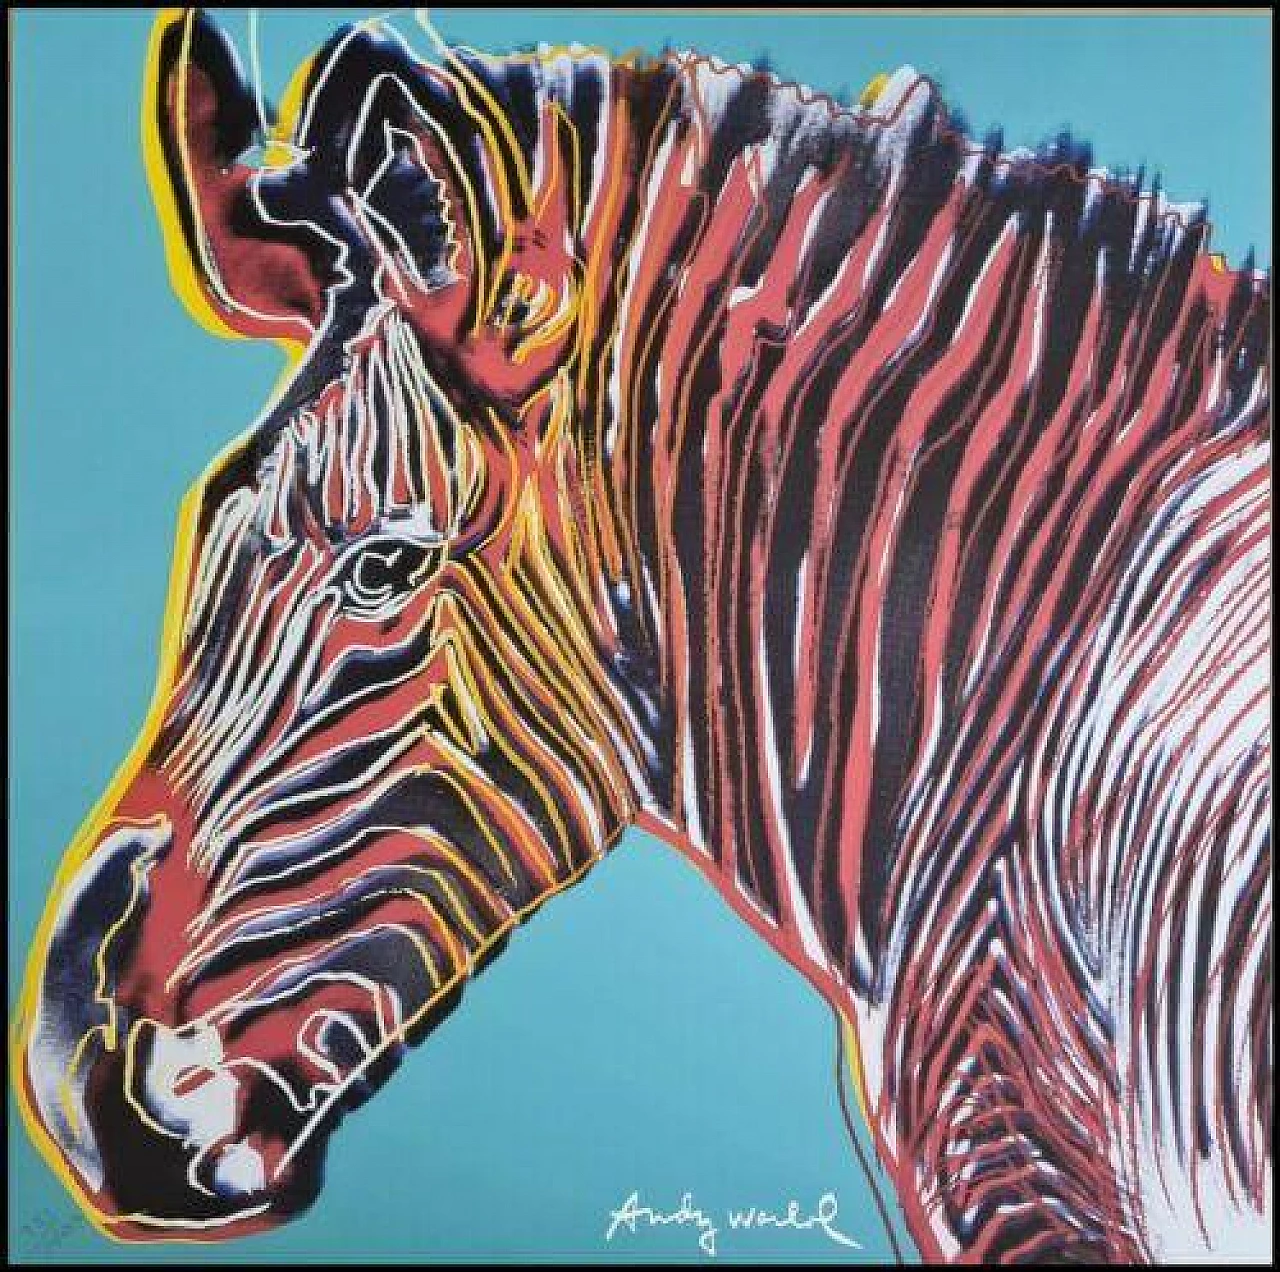 Zebra, lithography, reproduction after Andy Warhol 11